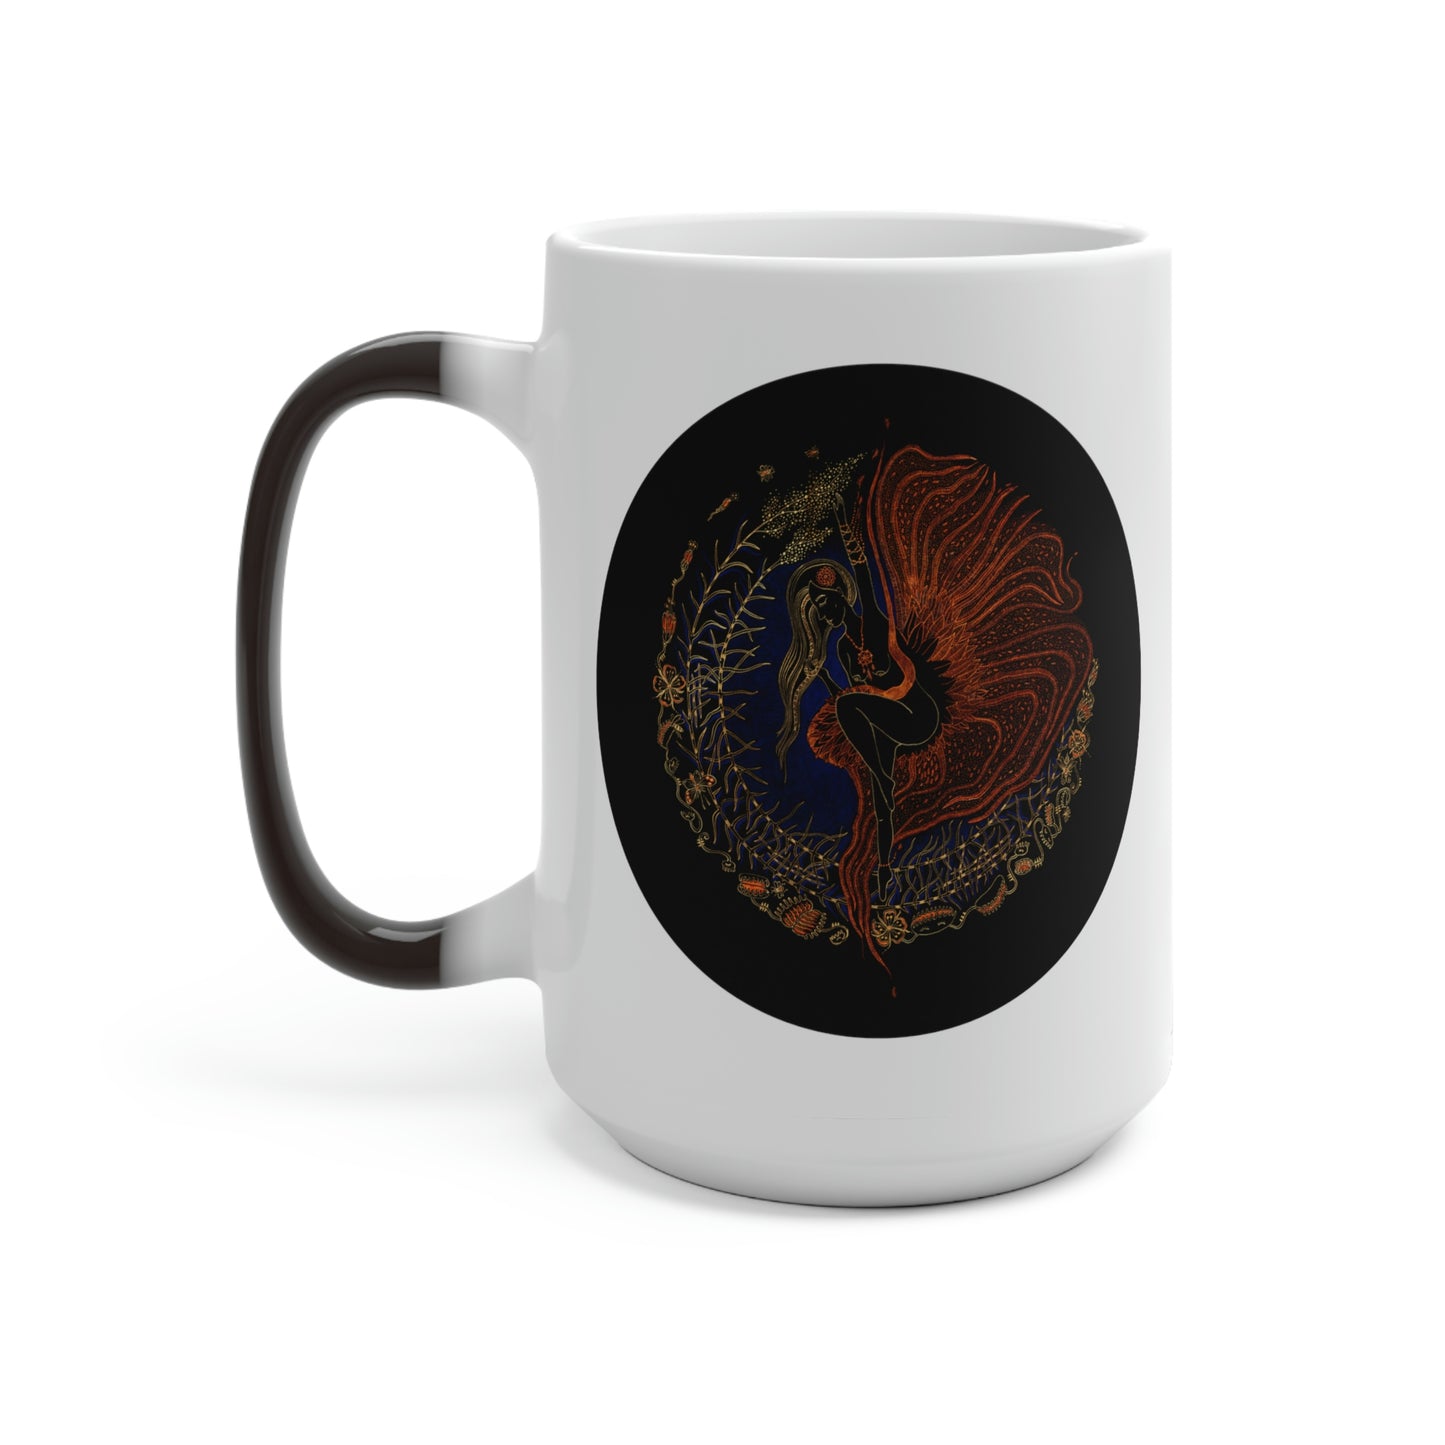 Chinese Zodiac Sign Color Changing Mug (Rooster)